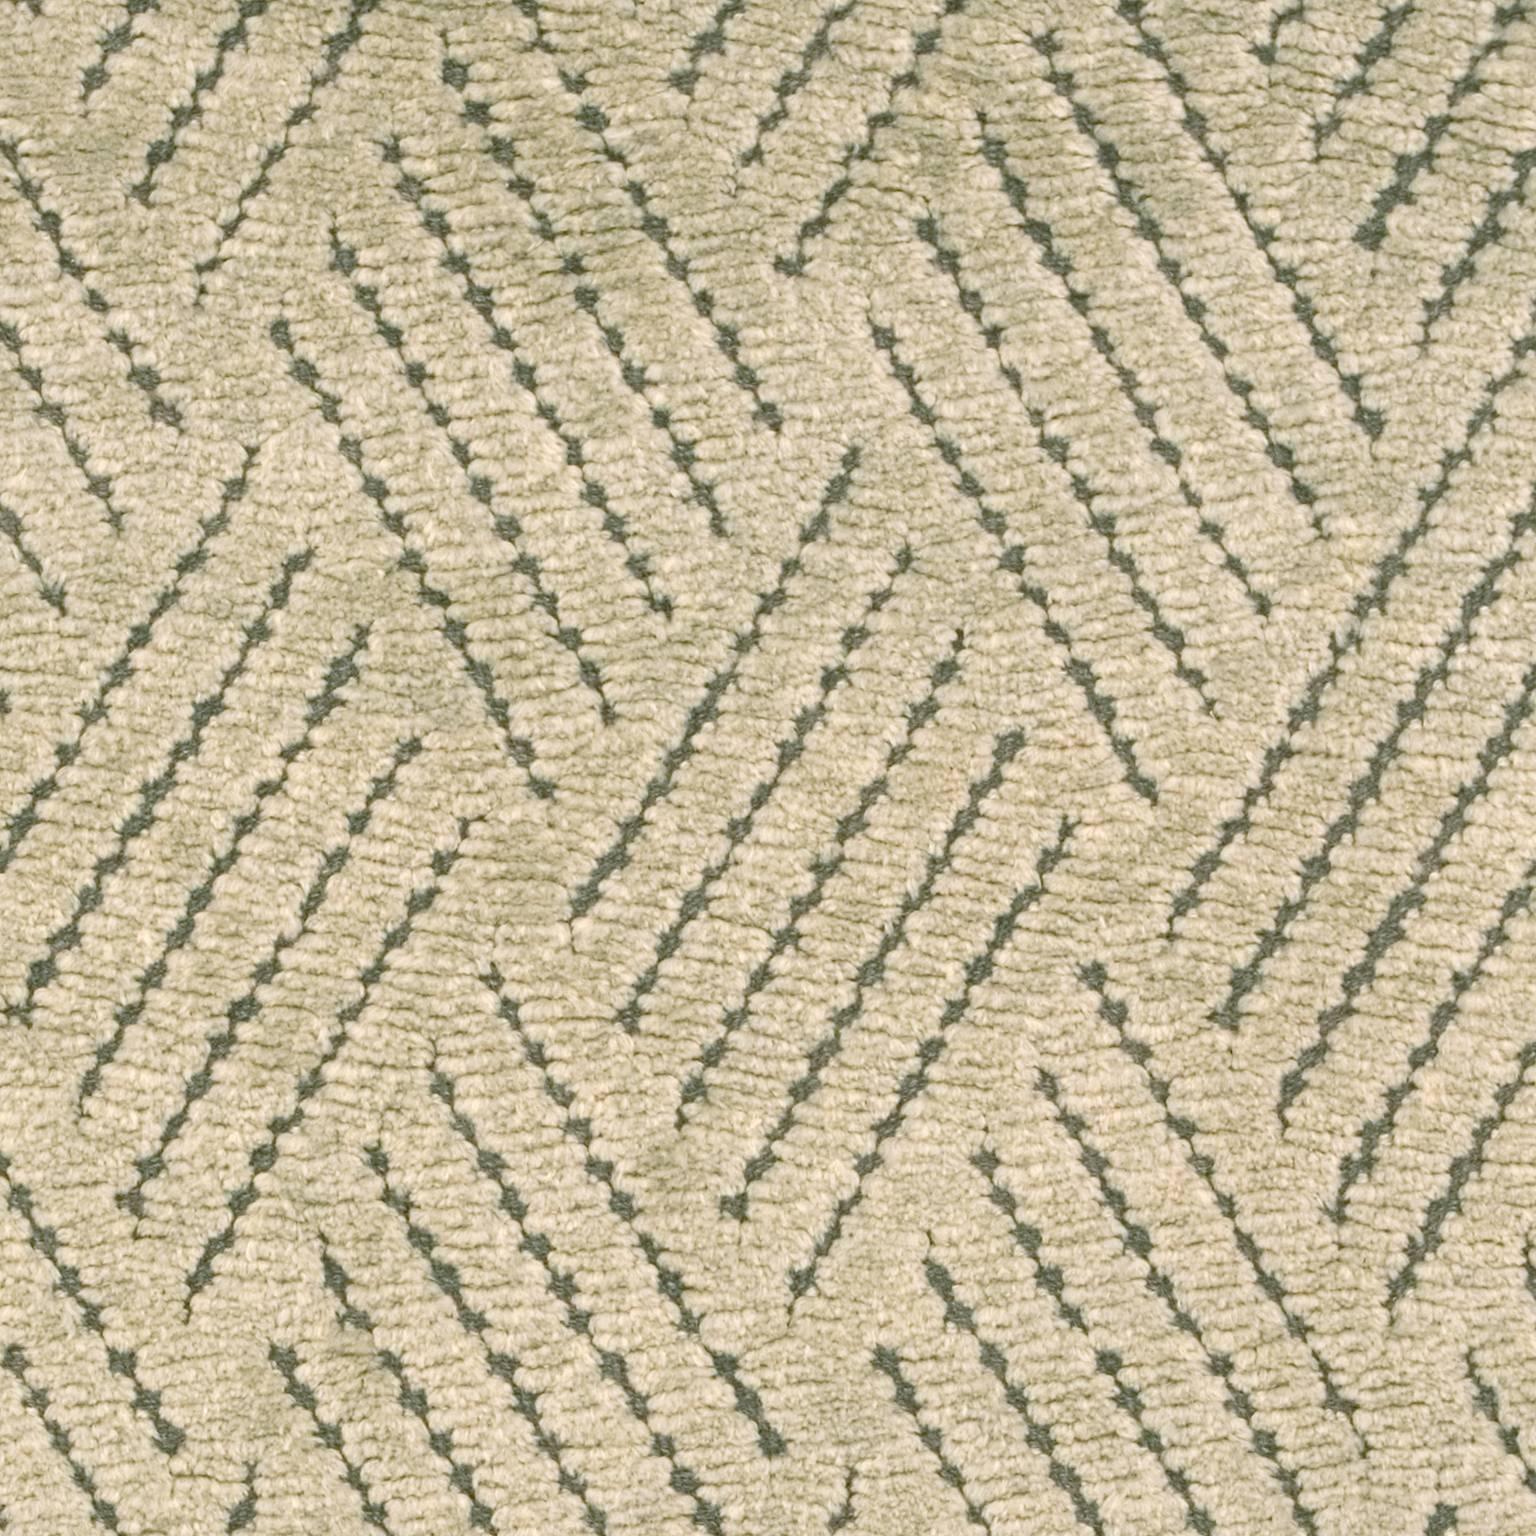 Hand-Woven Swedish Pile Carpet, Mid-20th Century For Sale